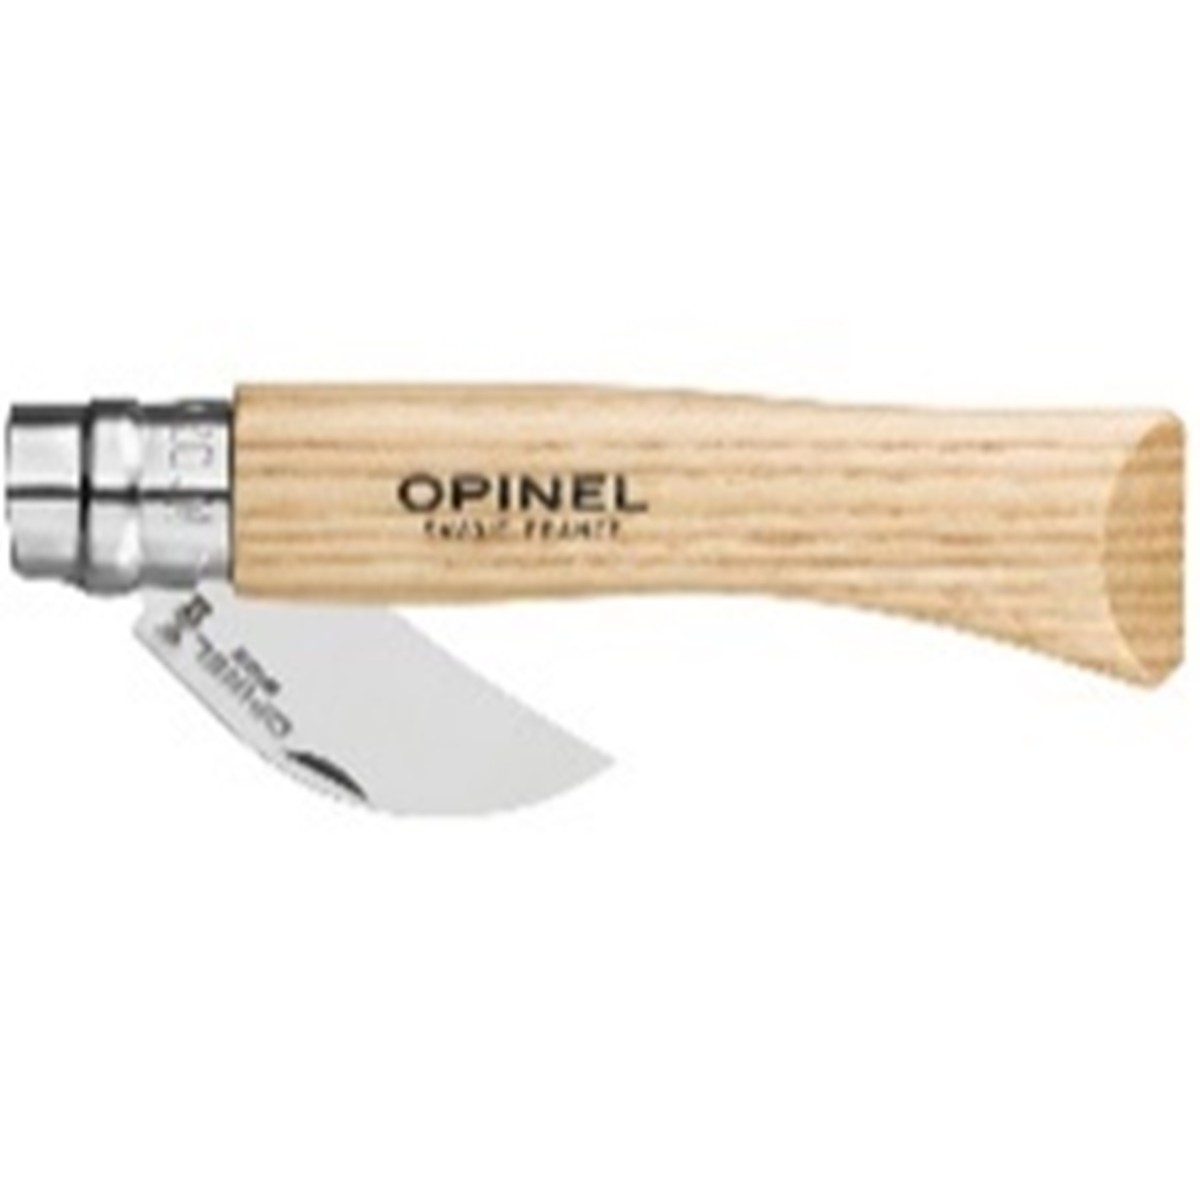  OPINEL Opinel N°7 Couteau Châtaigne & Ail  lame 4cm